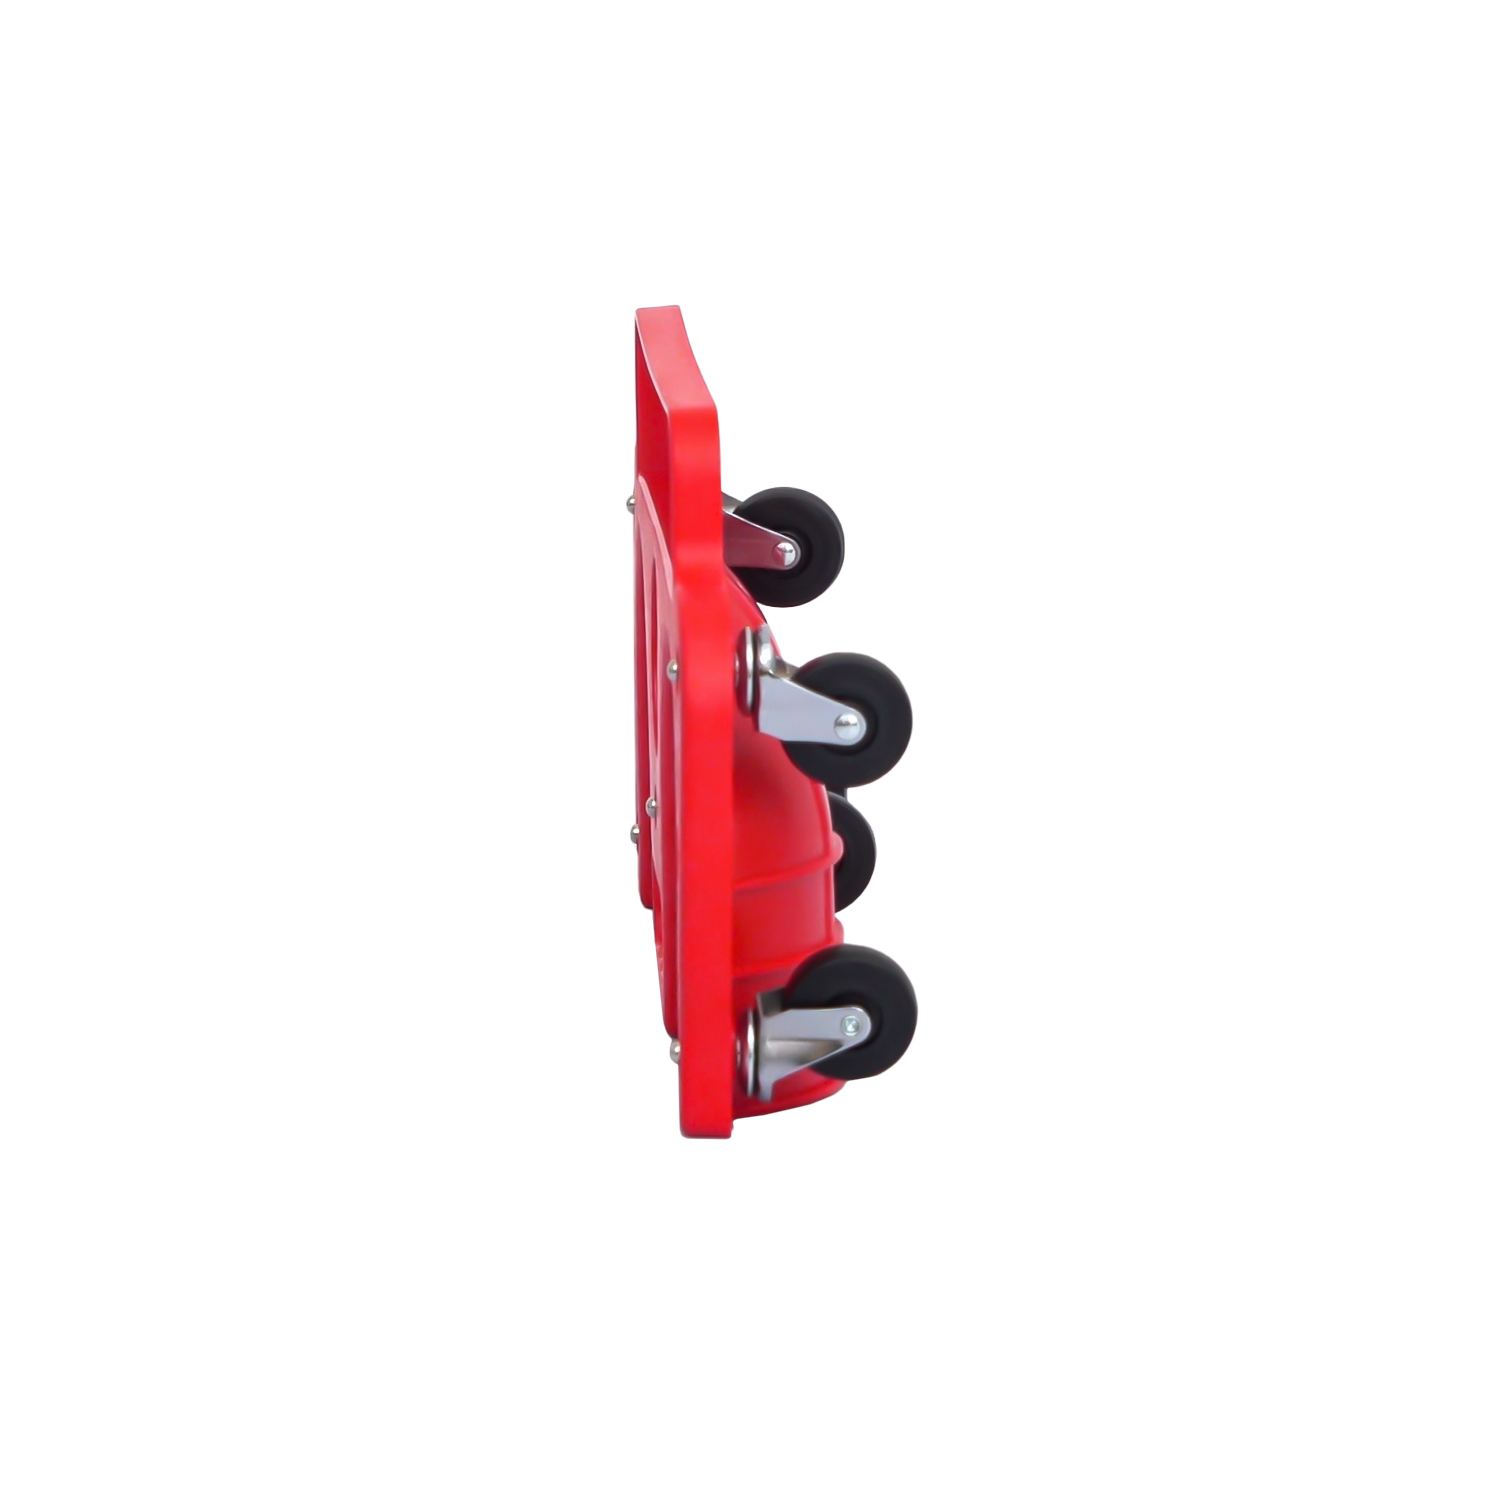 M-AUTO Rolling Knee Creeper, Convenient and Labor-saving Universal Wheel To  Move Woodworking Kneeling Pad, 200 lbs Capacity - Red 